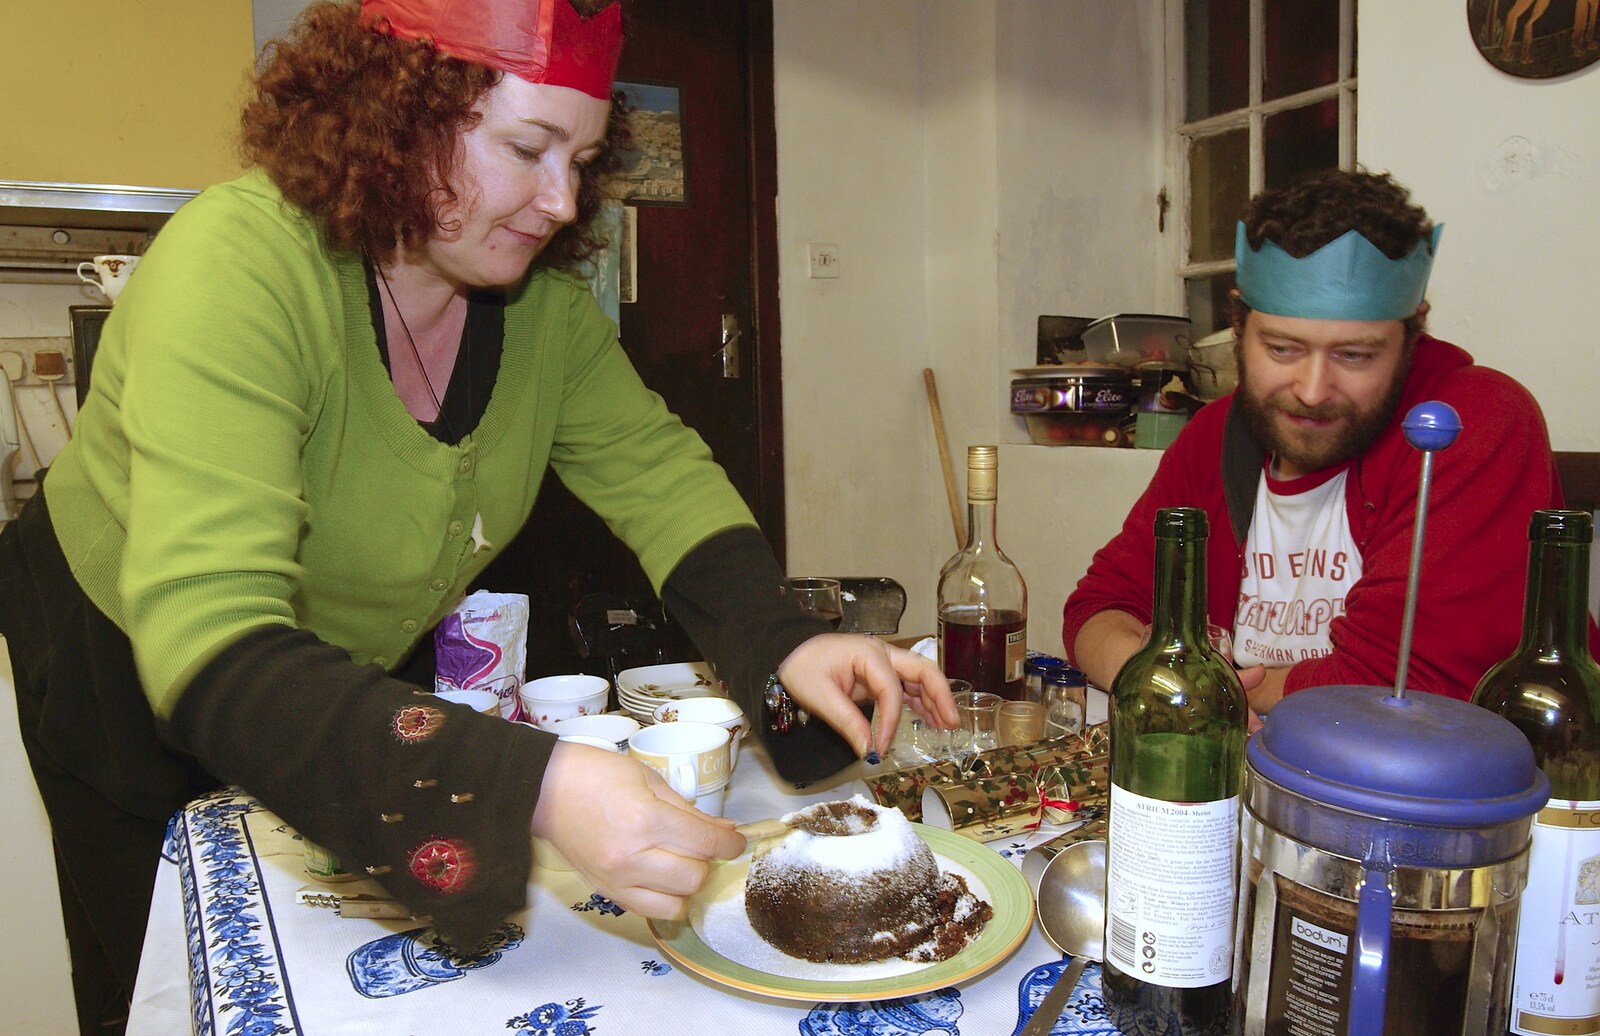 Louise prepares the Christmas pudding from The BBs at the Park Hotel, and Christmas in Blackrock, Dublin, Ireland - 25th December 2006